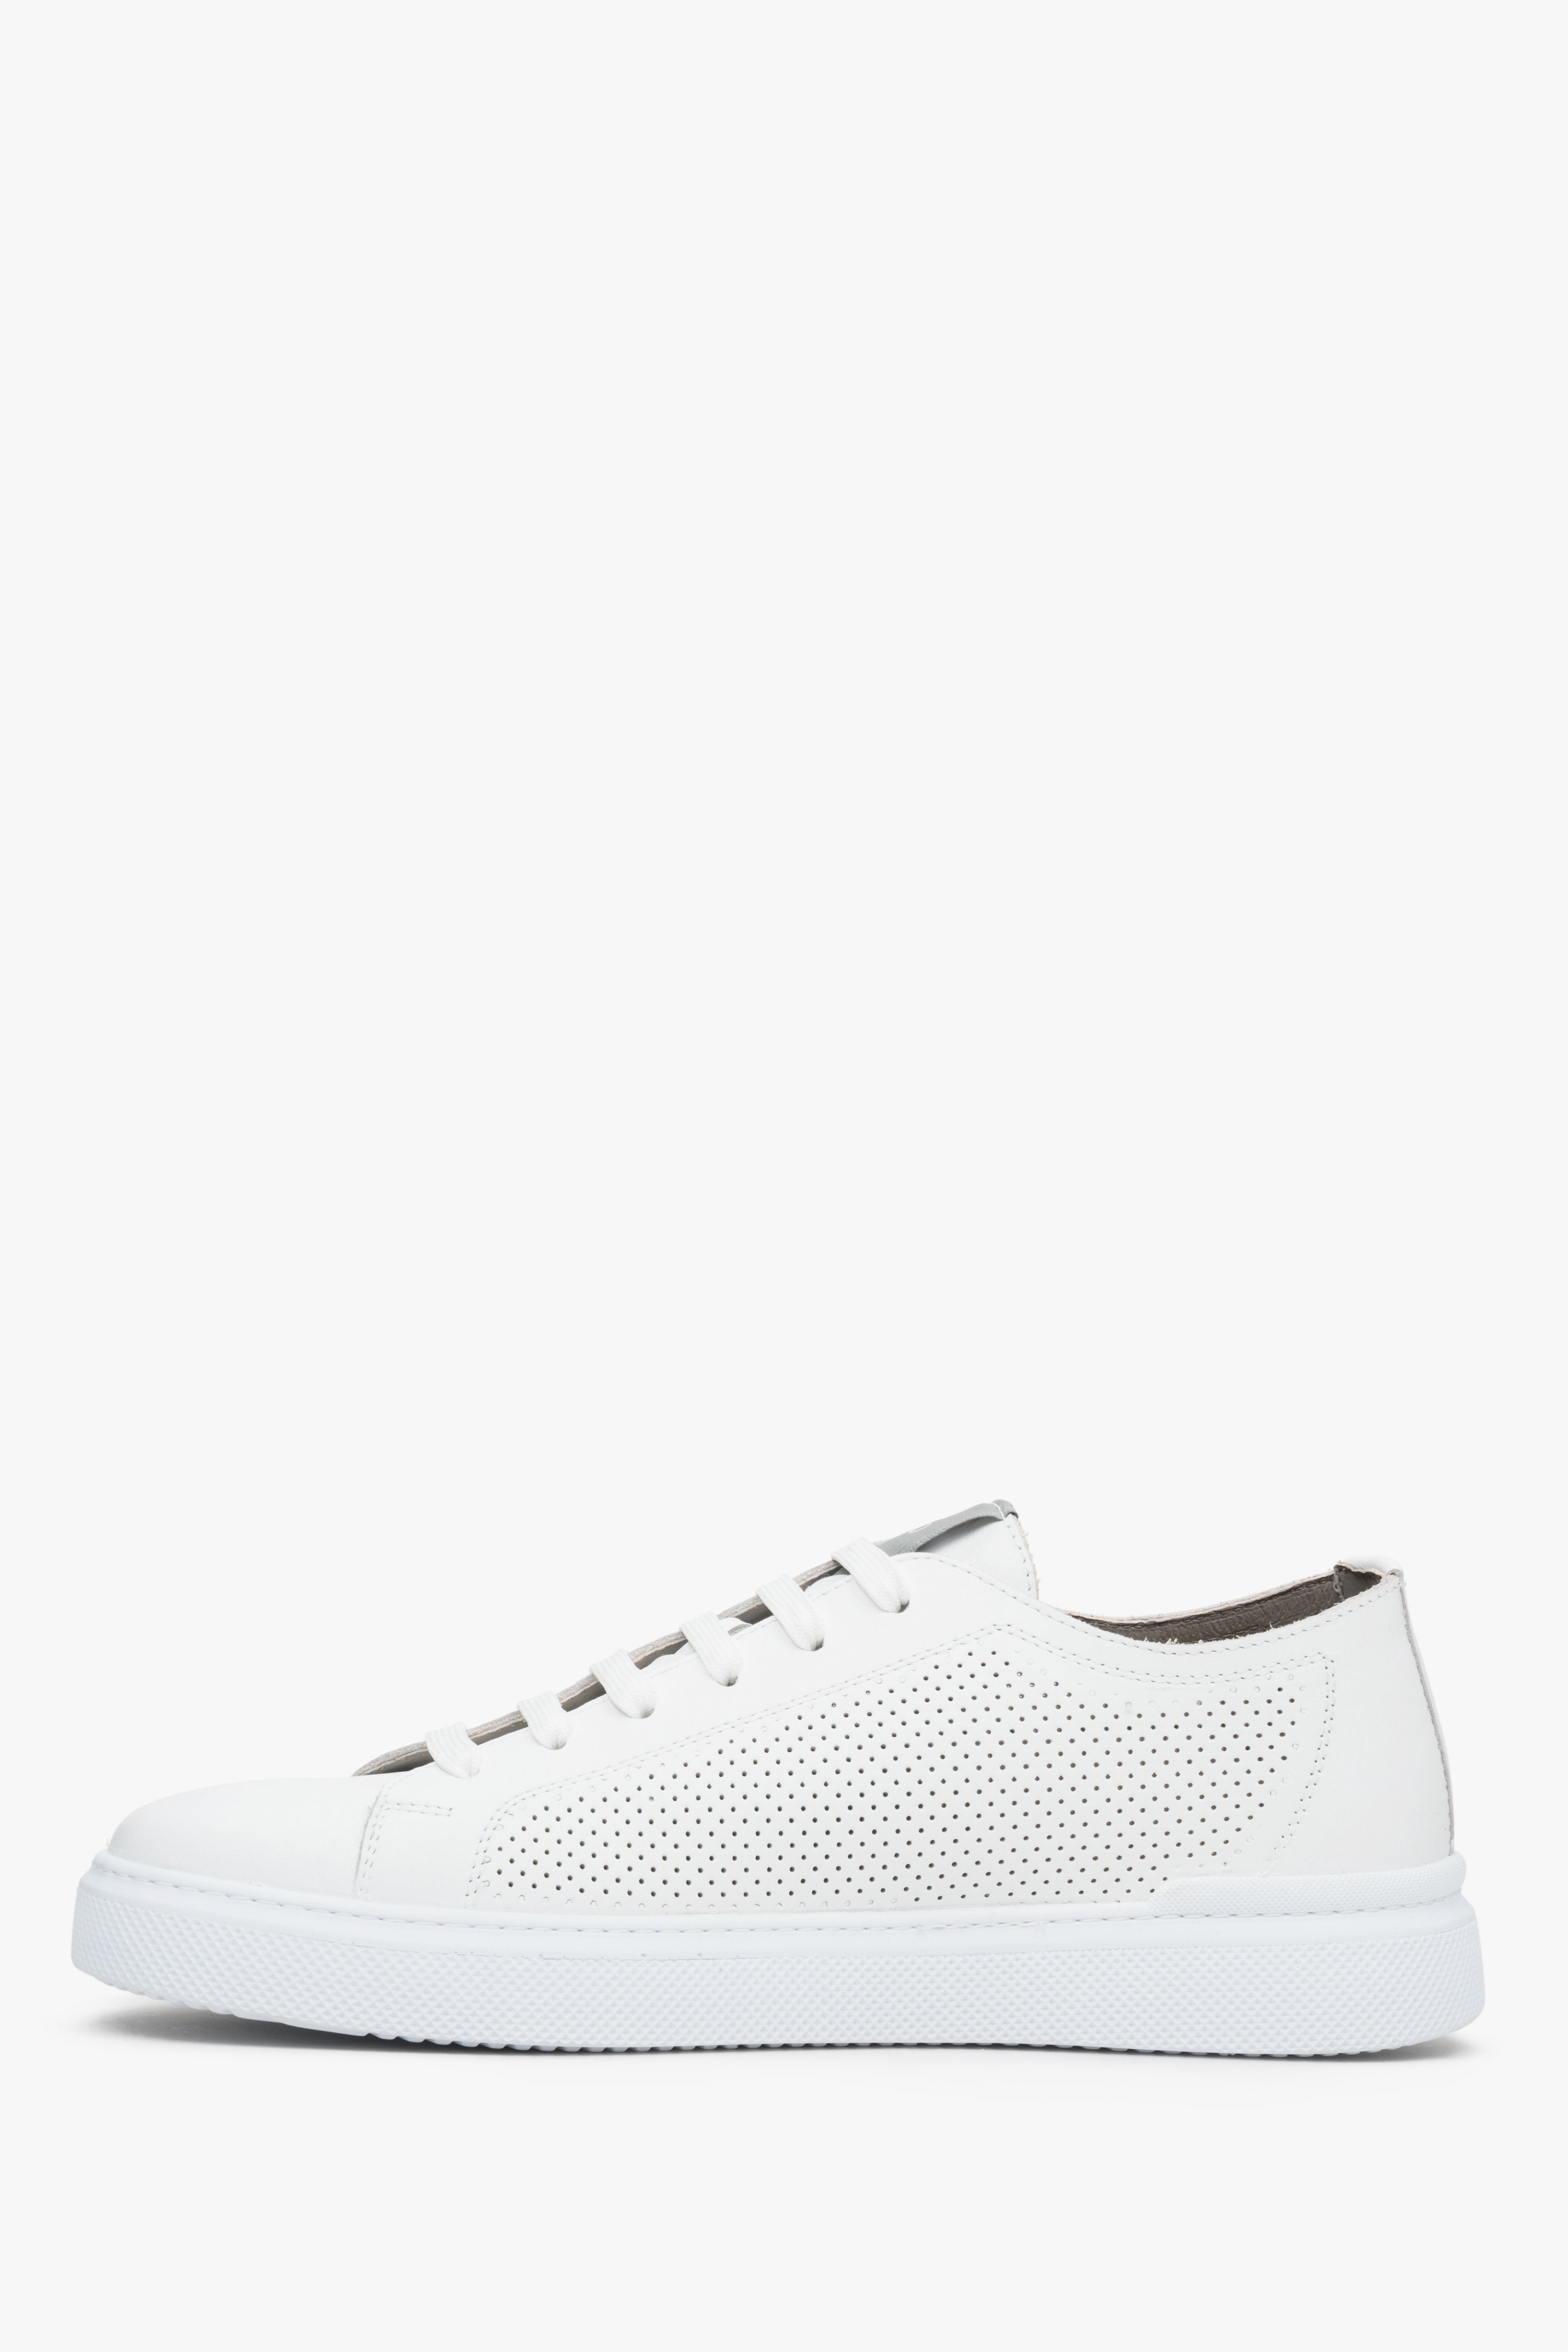 Men's summer sneakers in white, perforated of Estro brand. 